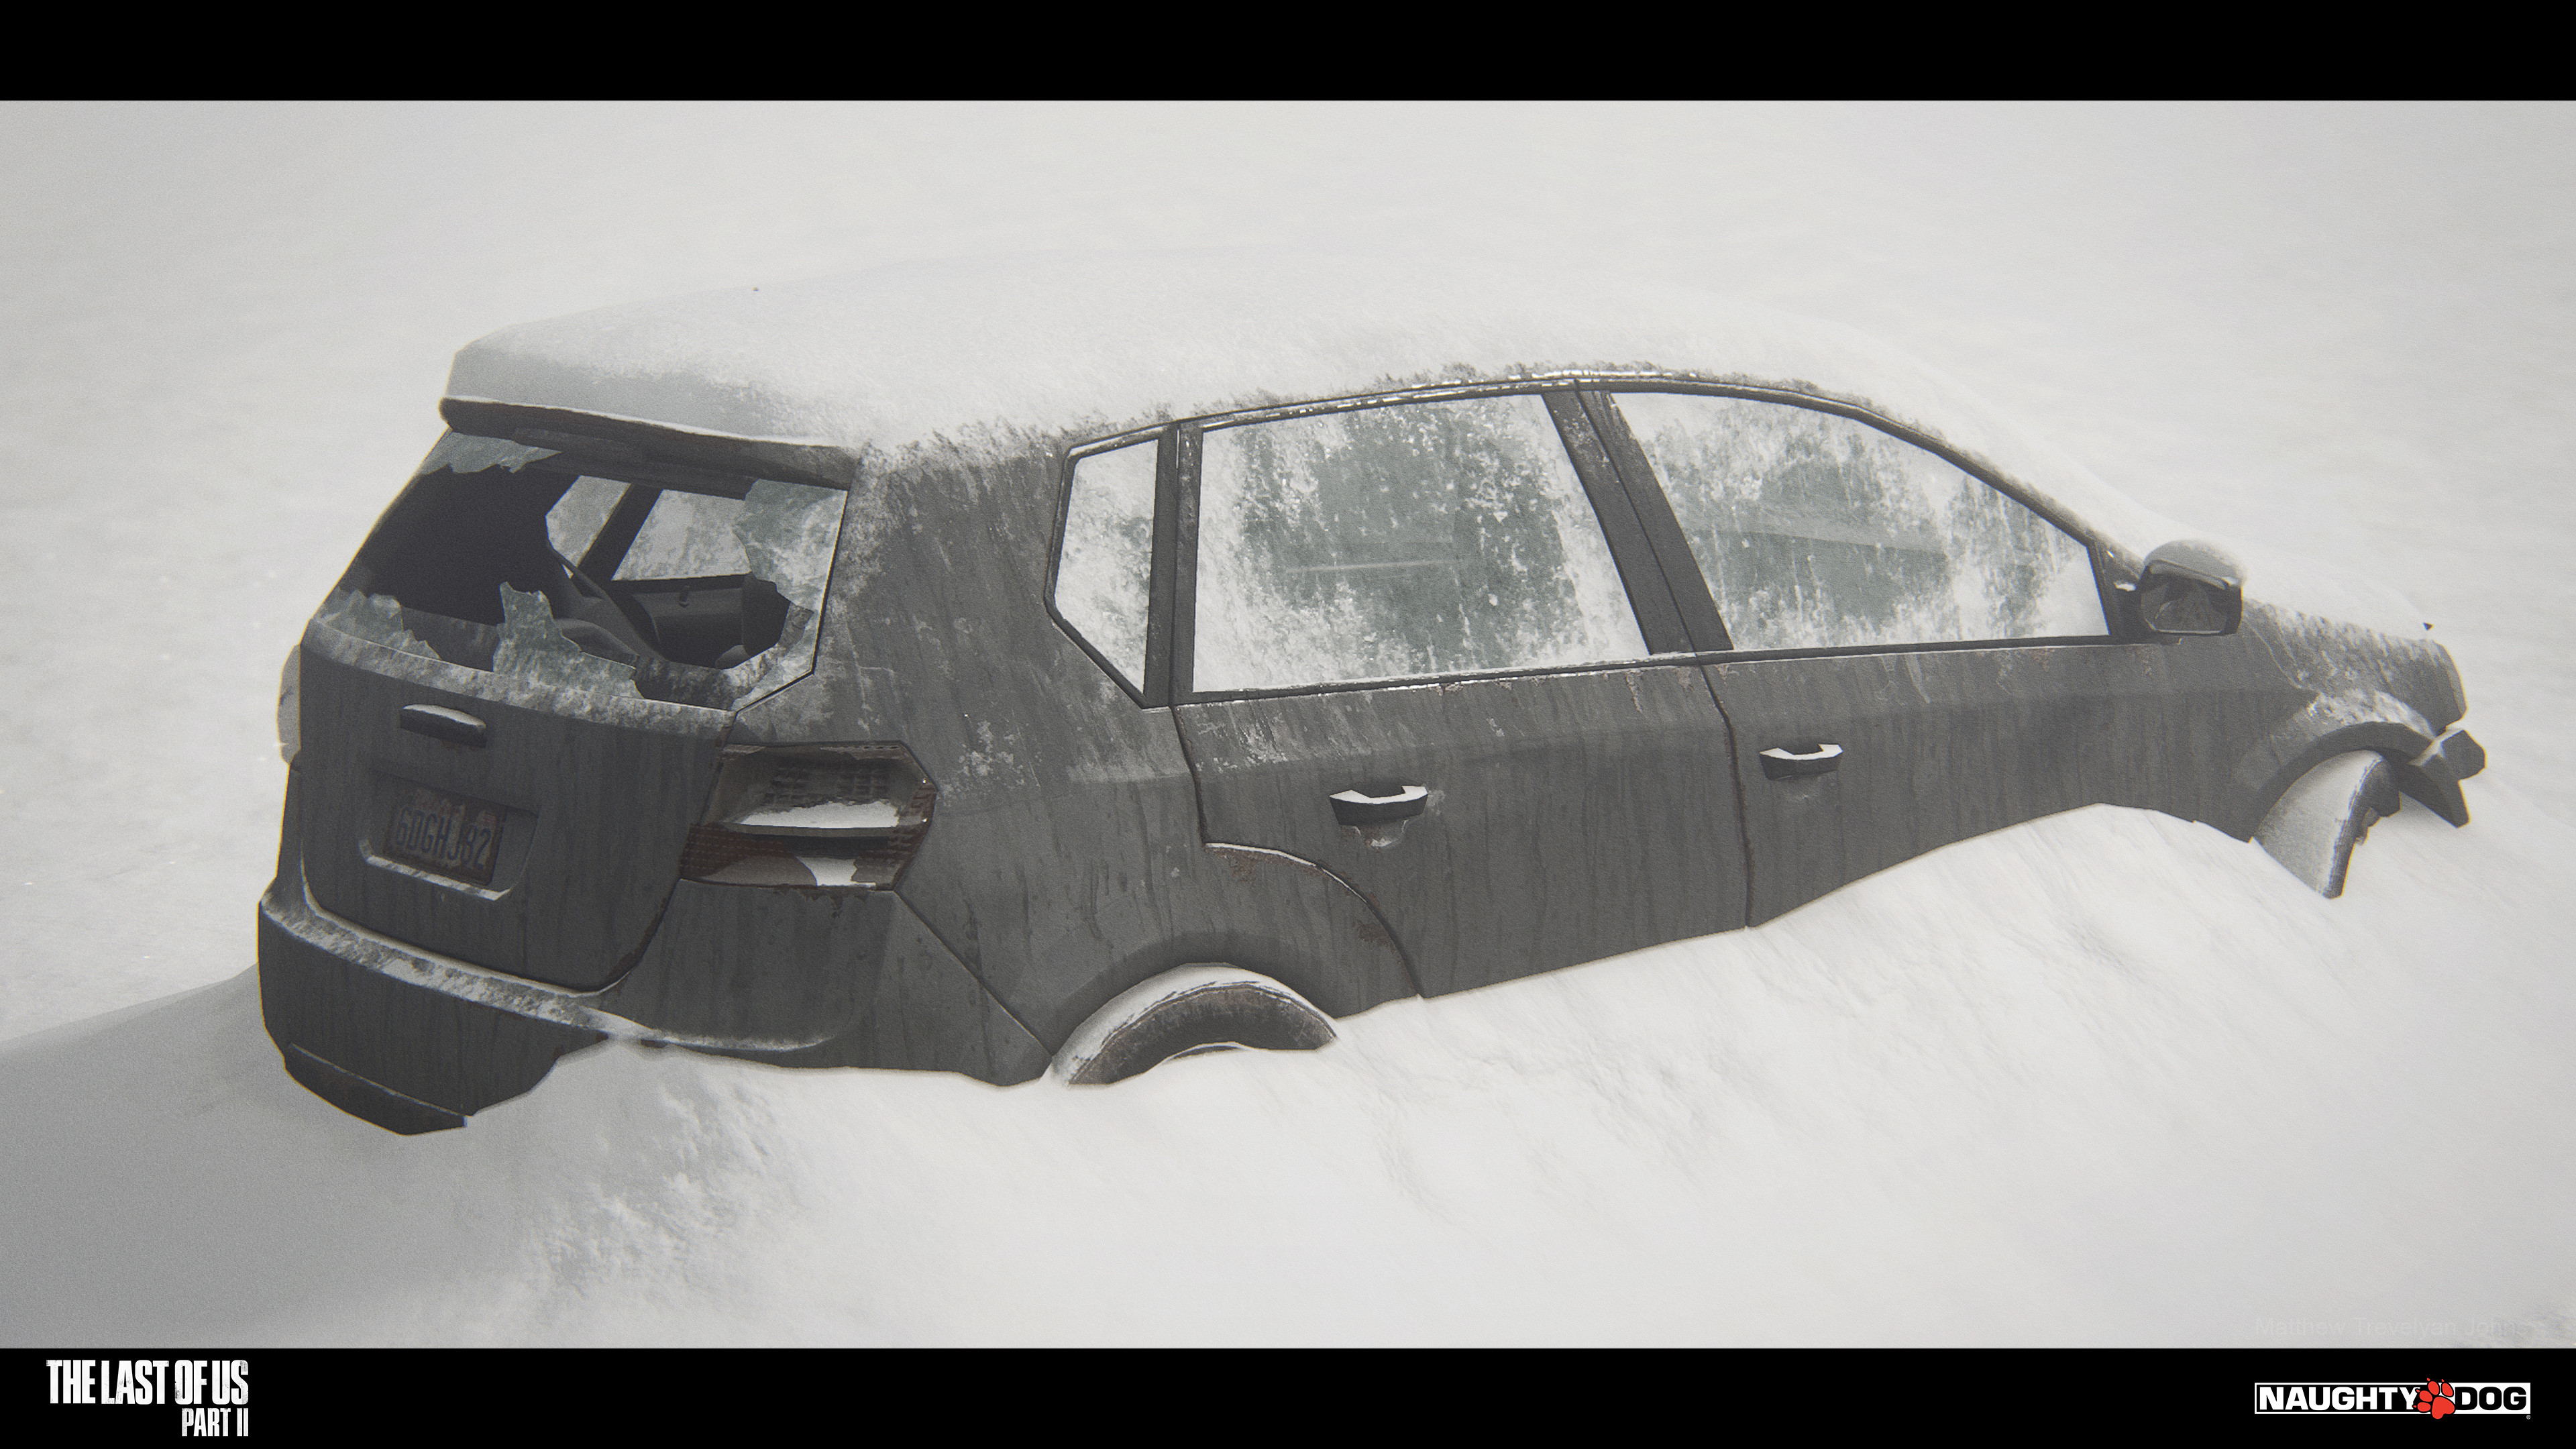 The is a nice example of the final 'look' that I created for the snow vehicles. The vehicle model was shared between all 'looks' but the shader treatment and 'snow-kit' made these suitable for our snowy levels